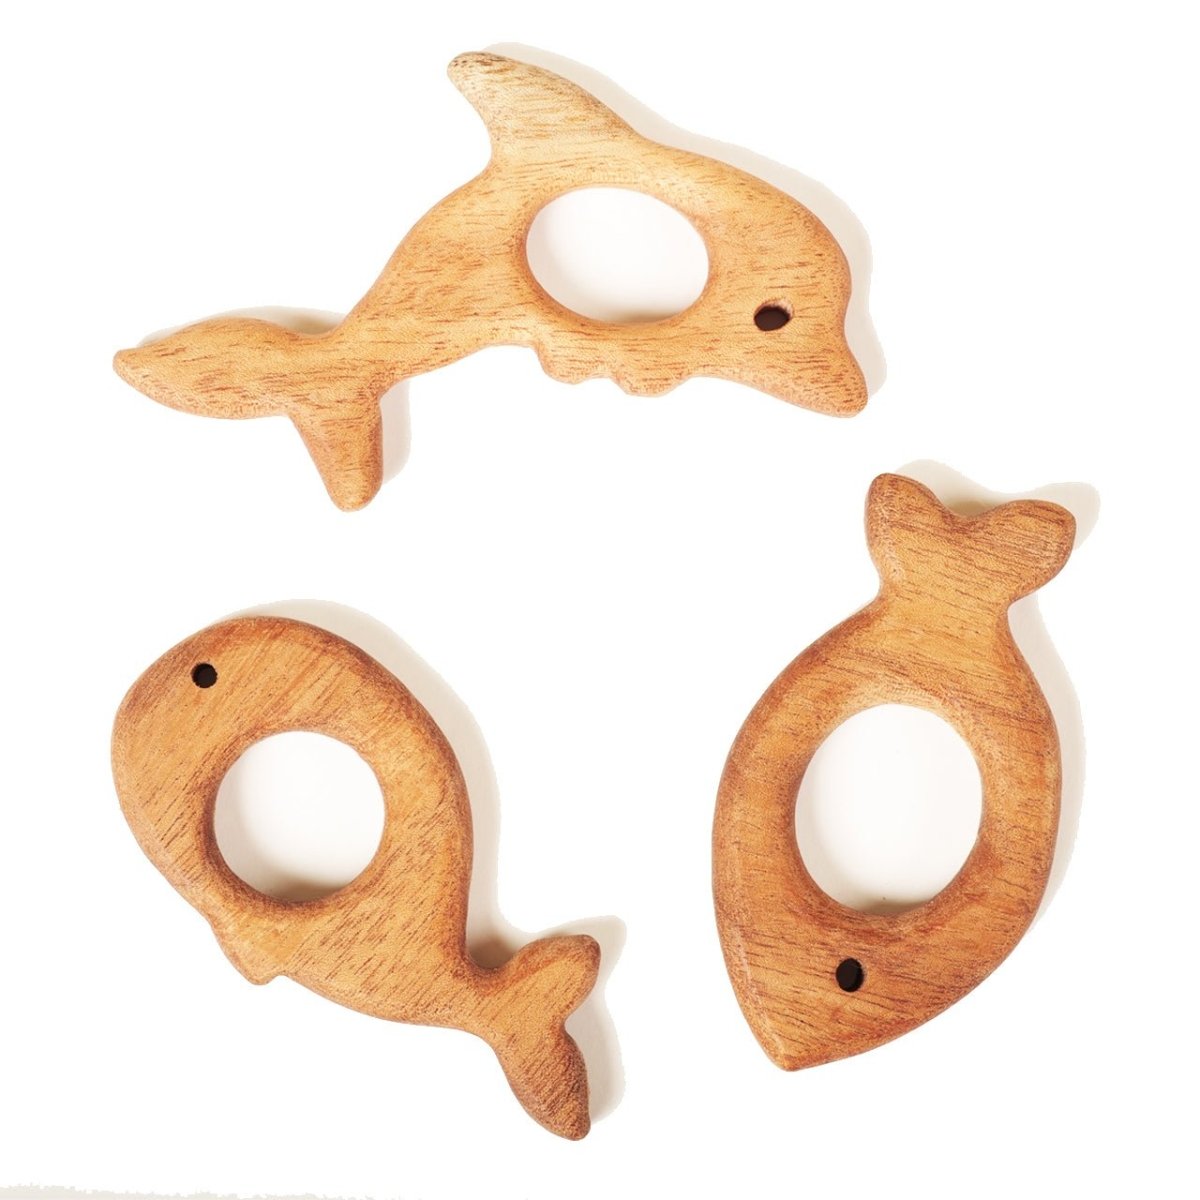 CuddlyCoo Neemwood Teether- Fishes (Set of 3) - CCTEETHER3FISHES